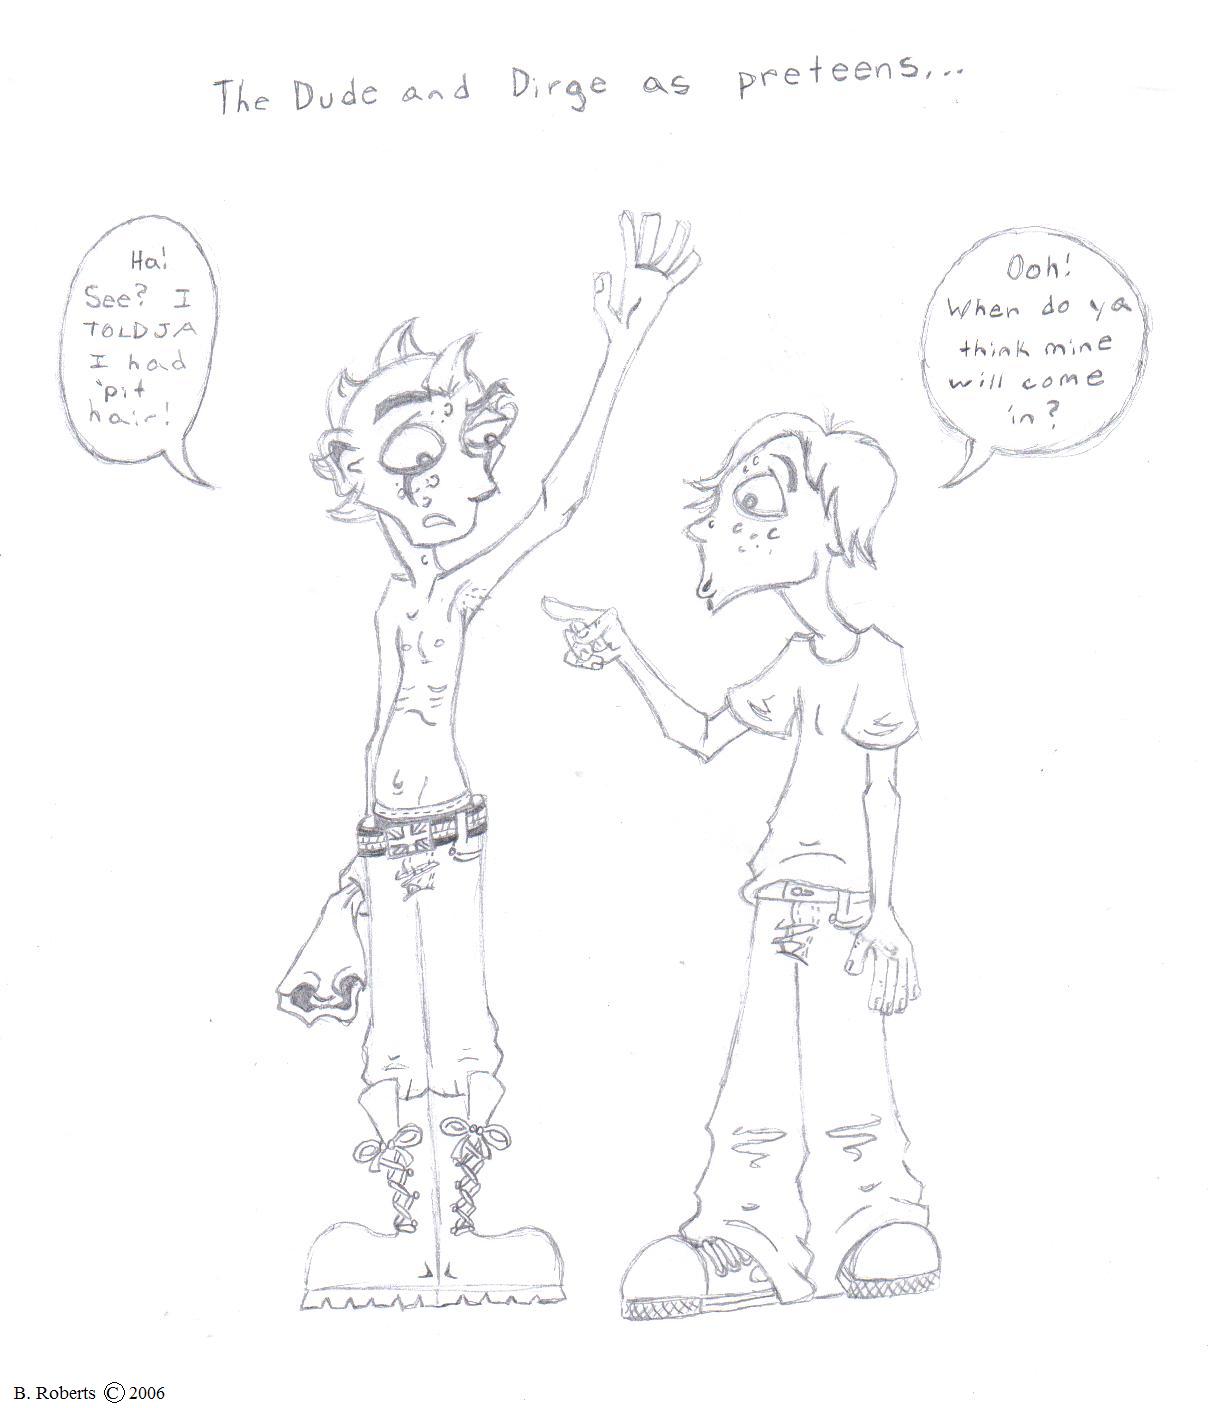 The Dude and Dirge as preteens by flammingcorn